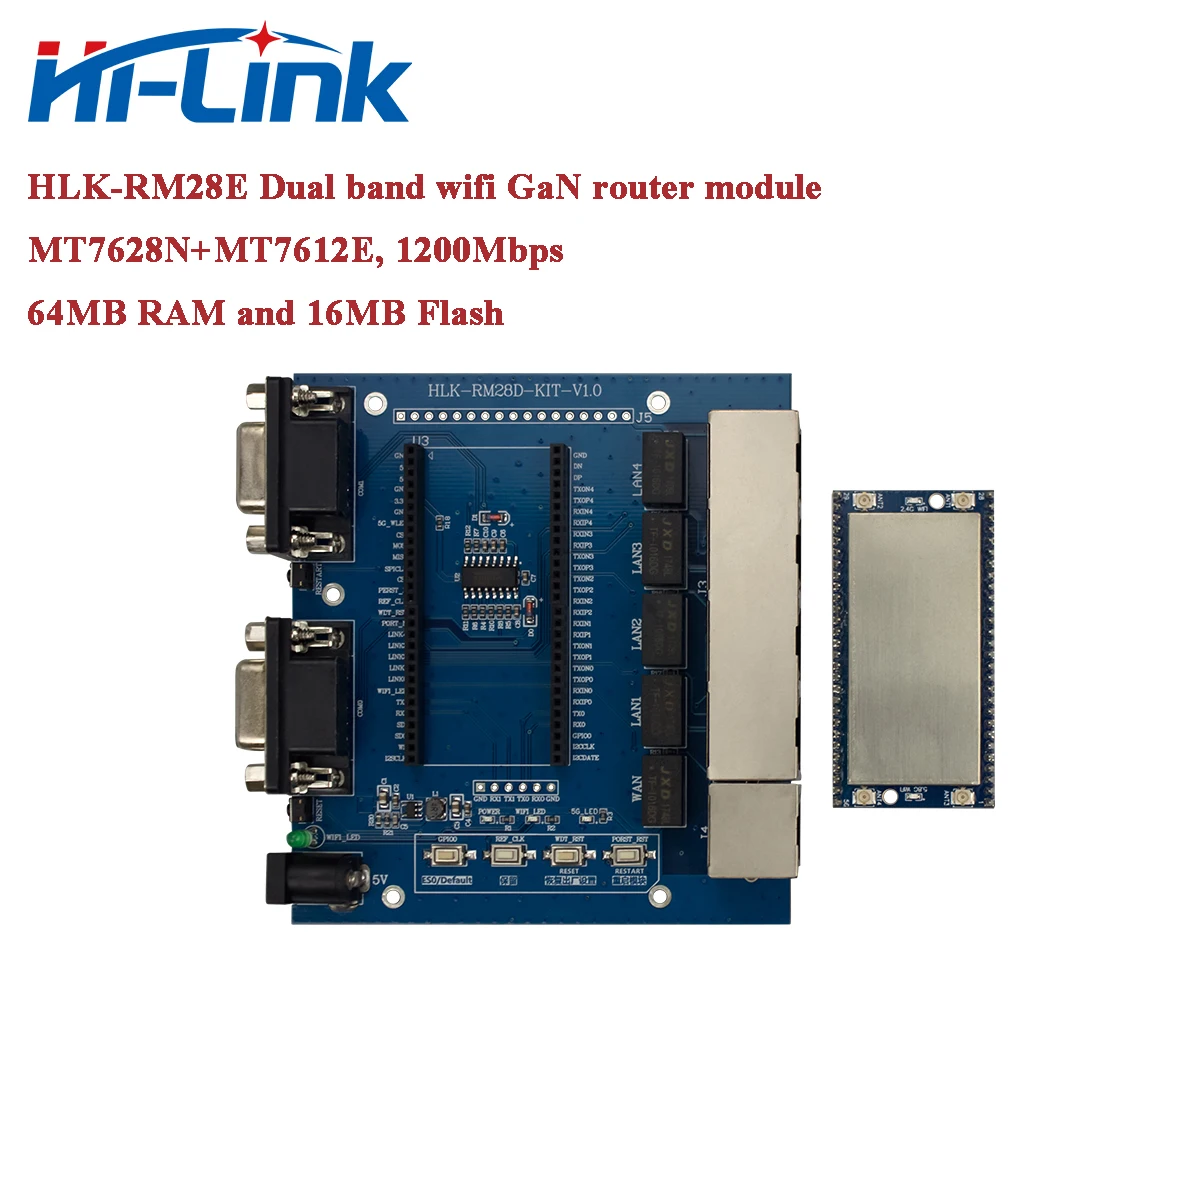 Free Shipping MT7628N+MT7612E Dual Band WiFi Router Module Kit HLK-RM28E 1200Mbps with 64M RAM and 16M Flash